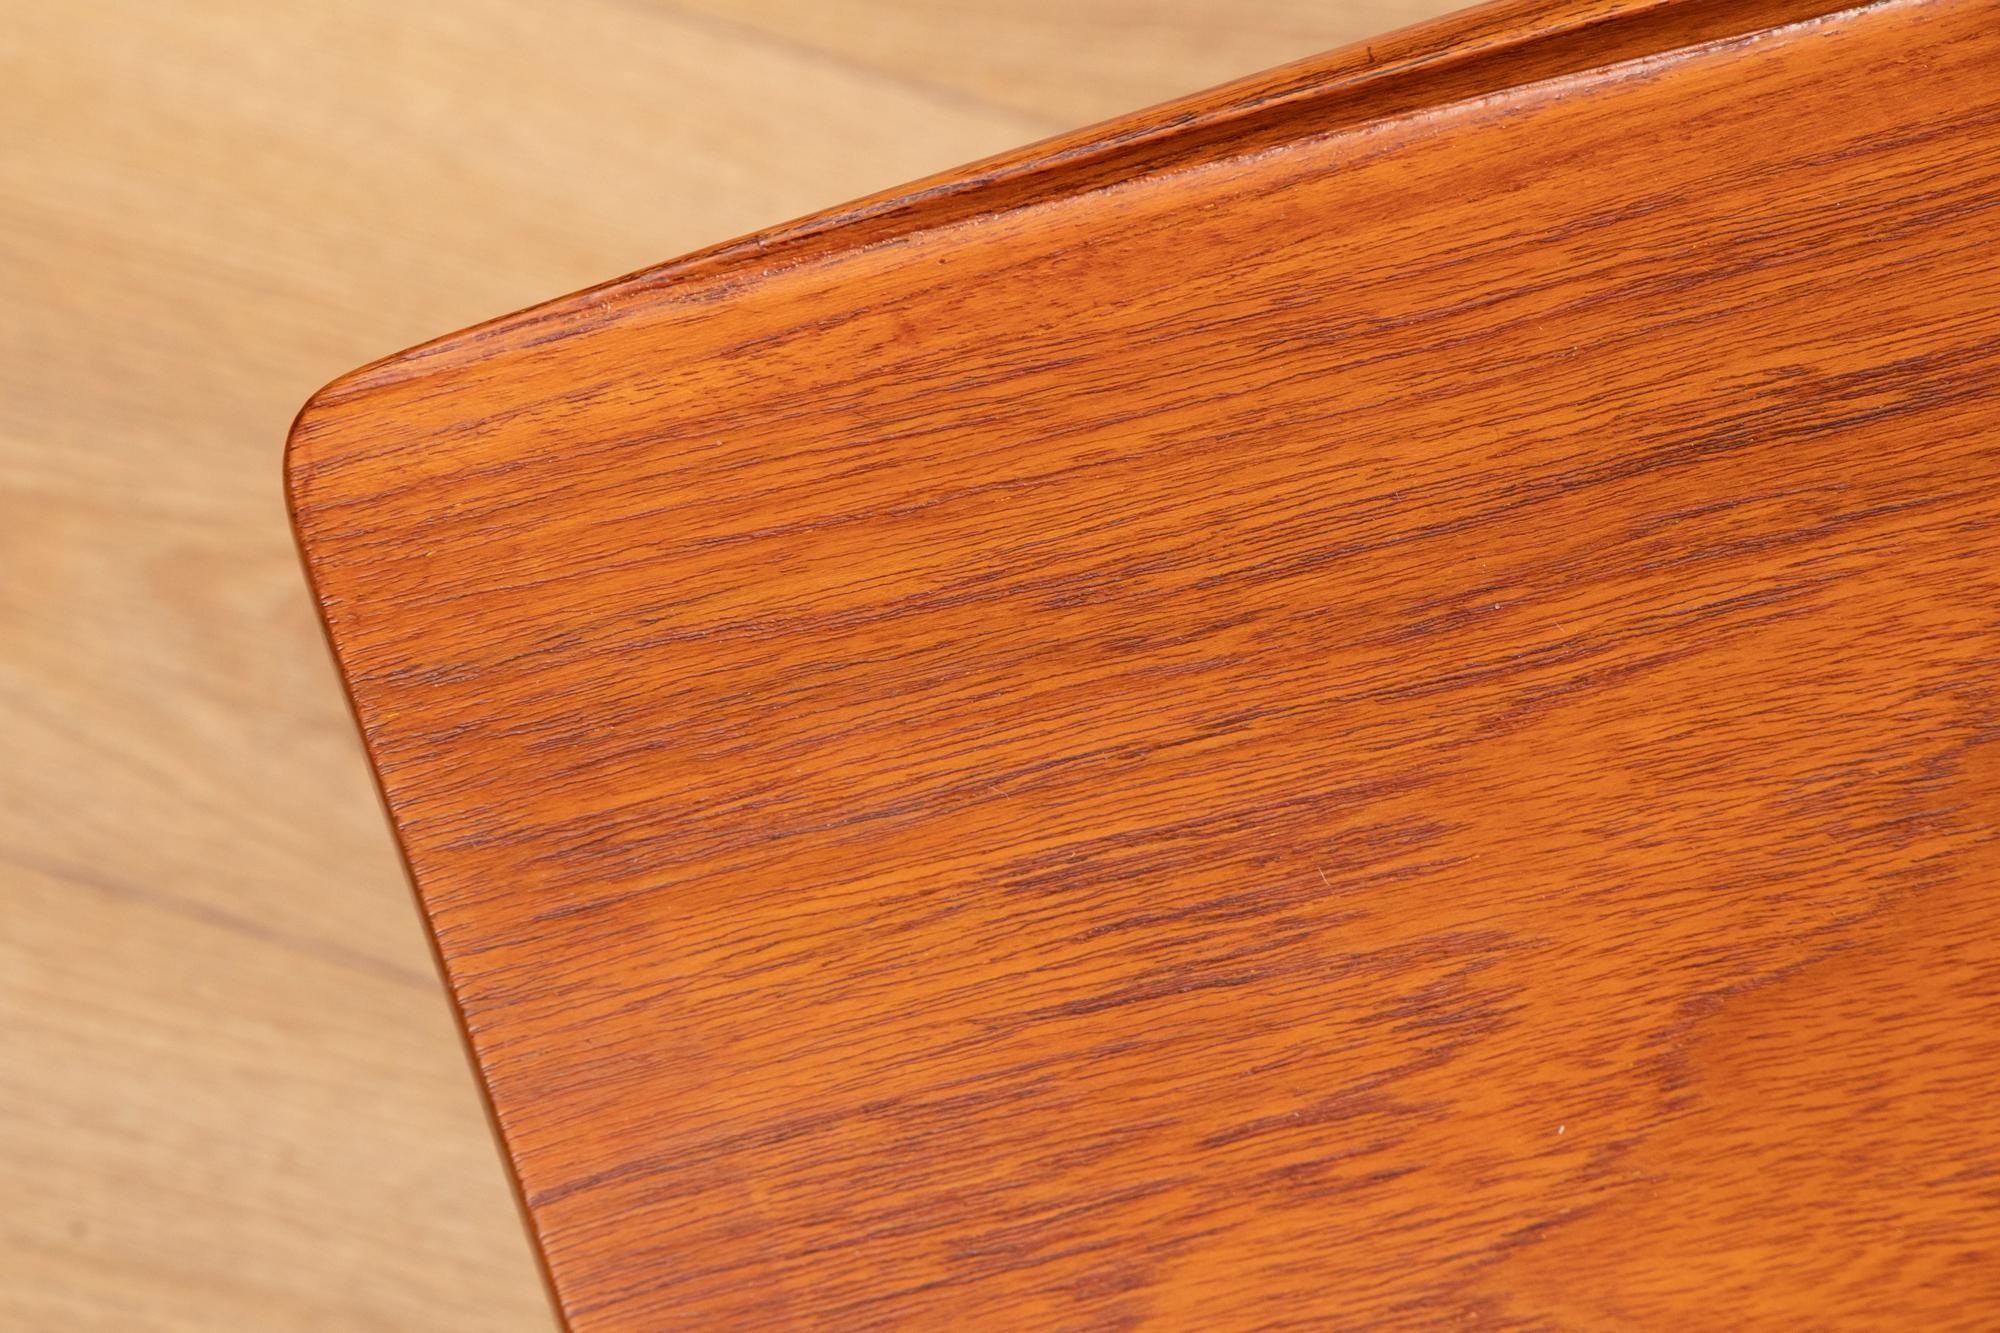 Midcentury Danish Teak Coffee Table by Grete Jalk for Poul Jeppesen, circa 1960 For Sale 1